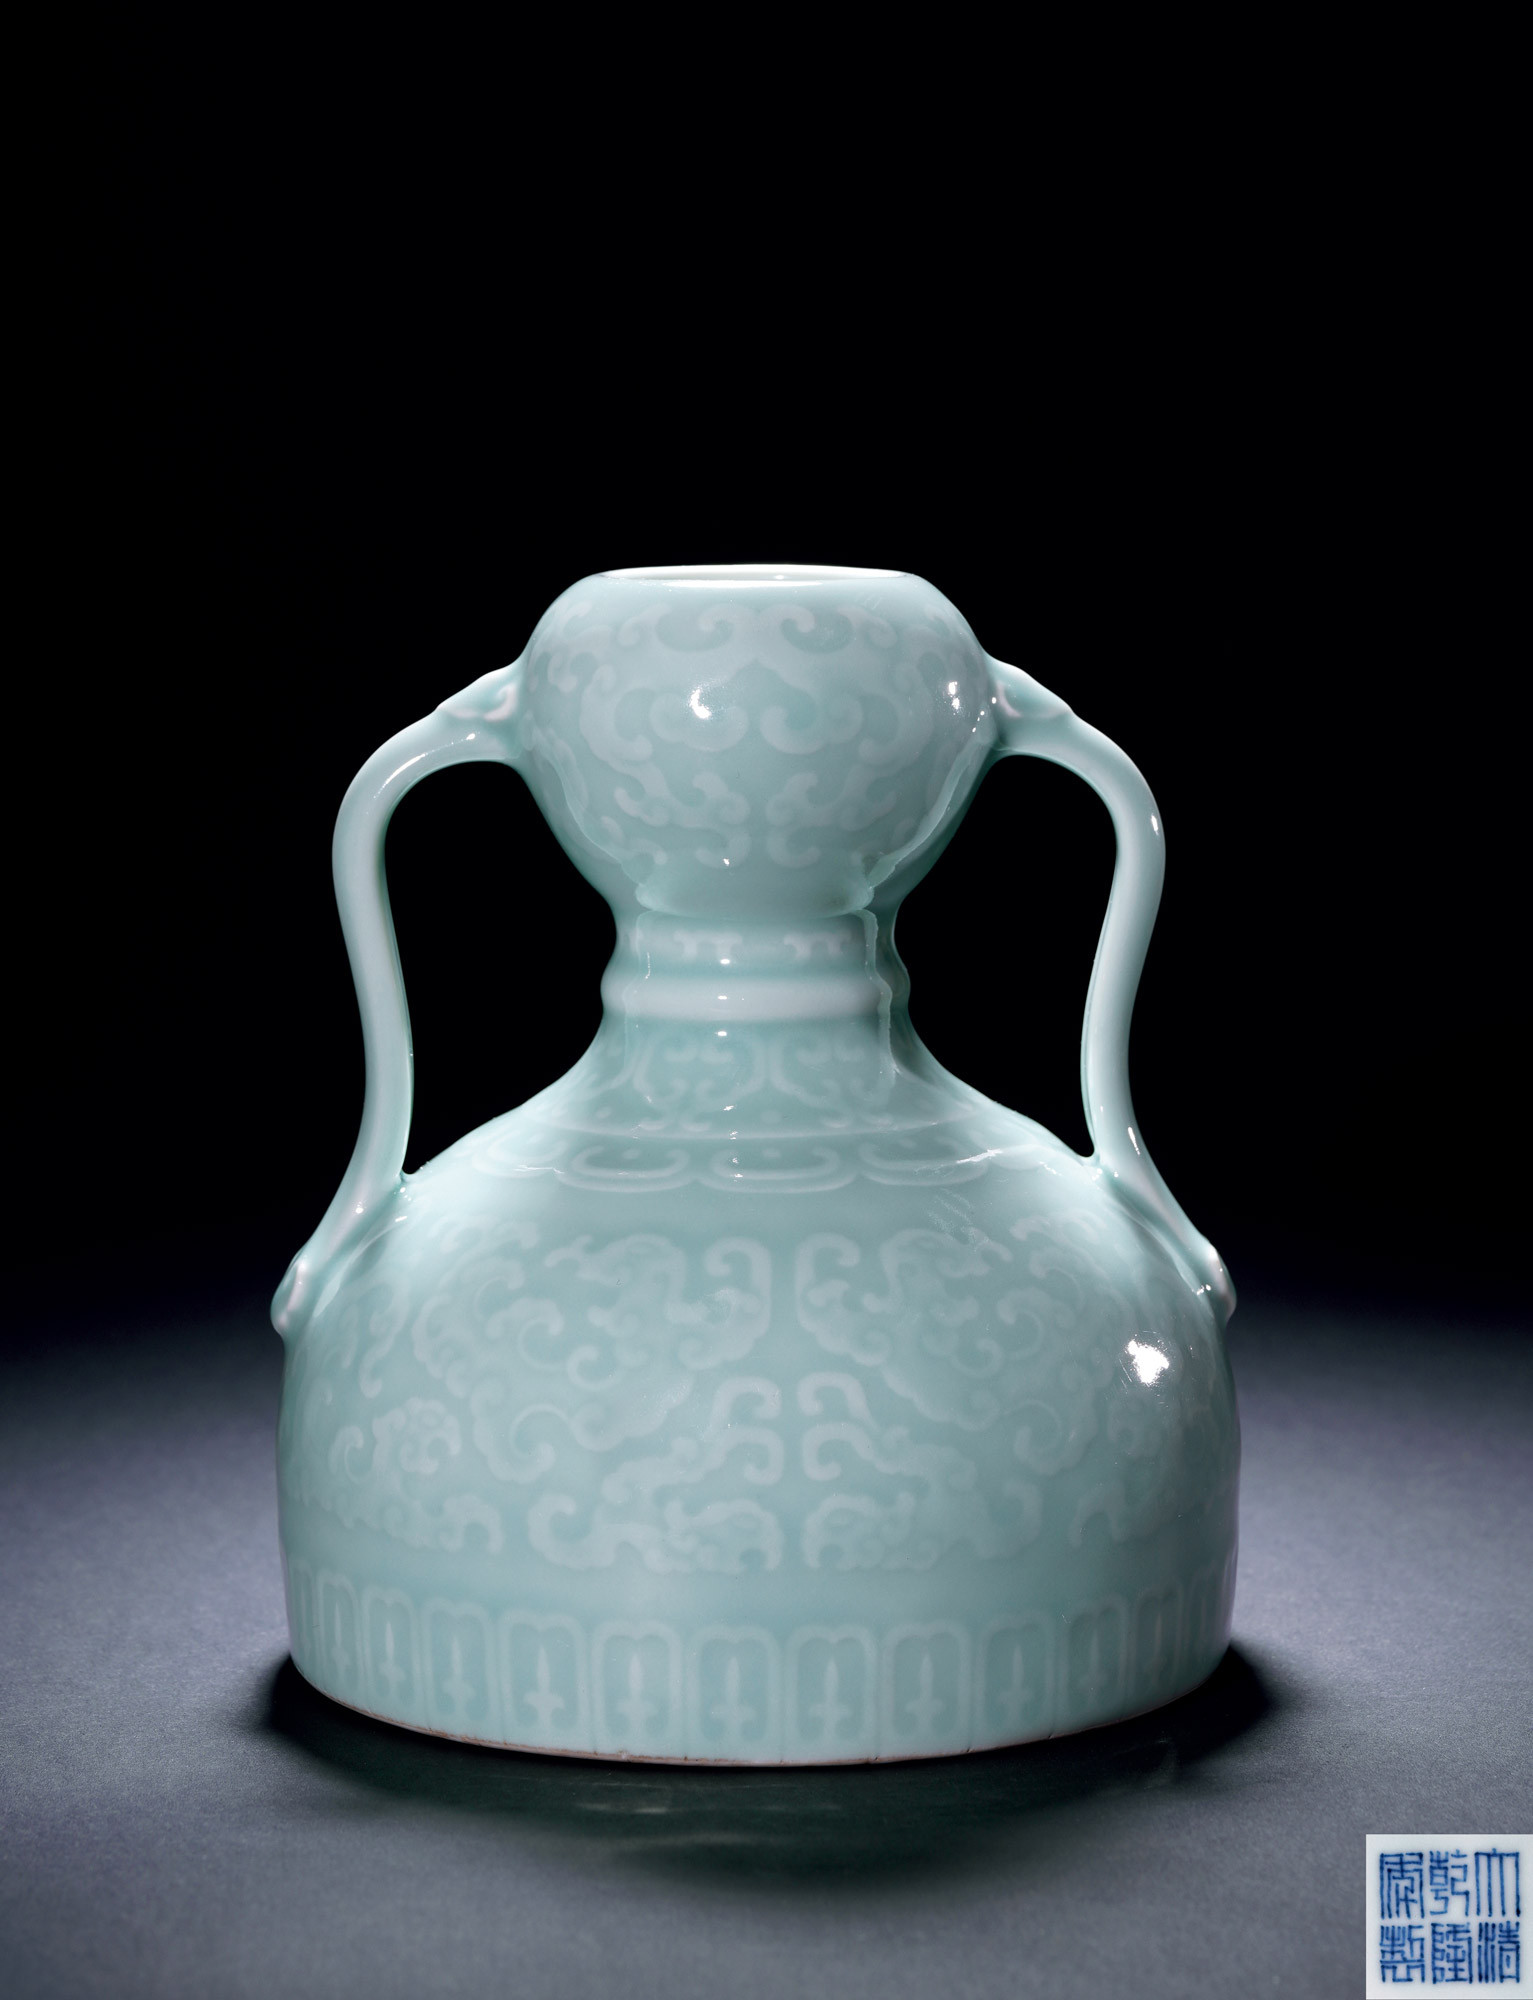 AN EXTREMELY IMPORTANT CELADON - GLAZED MOULDED‘KUI-DRAGON’GOURD-SHAPED VASE WITH HANDLES